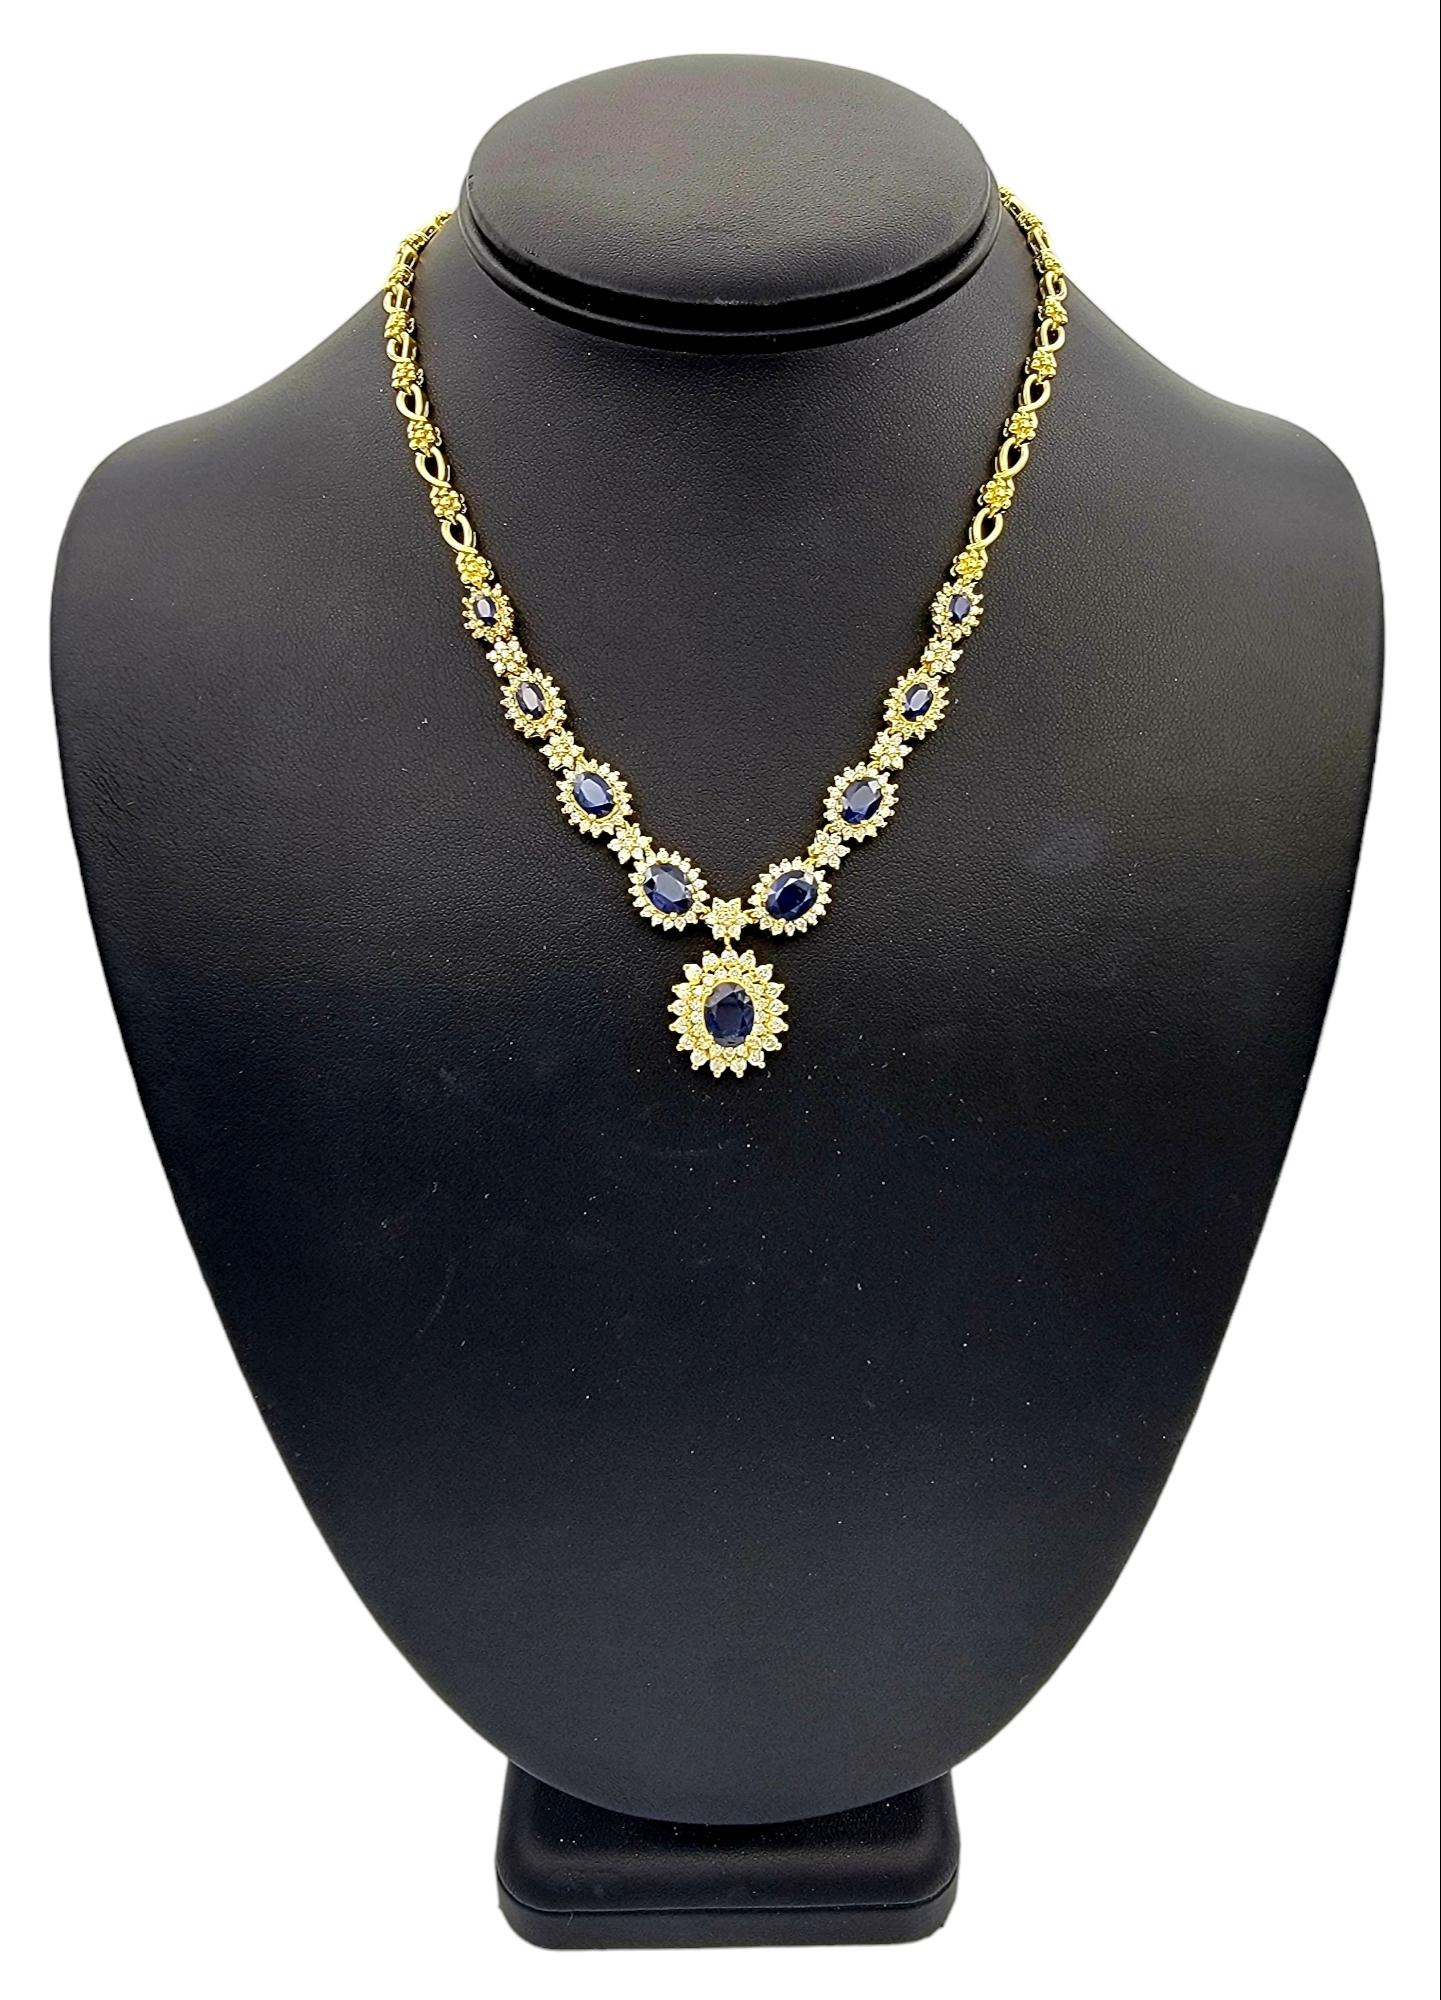 Hammerman Brothers Blue Sapphire and Diamond Necklace in 18 Karat Yellow Gold 3